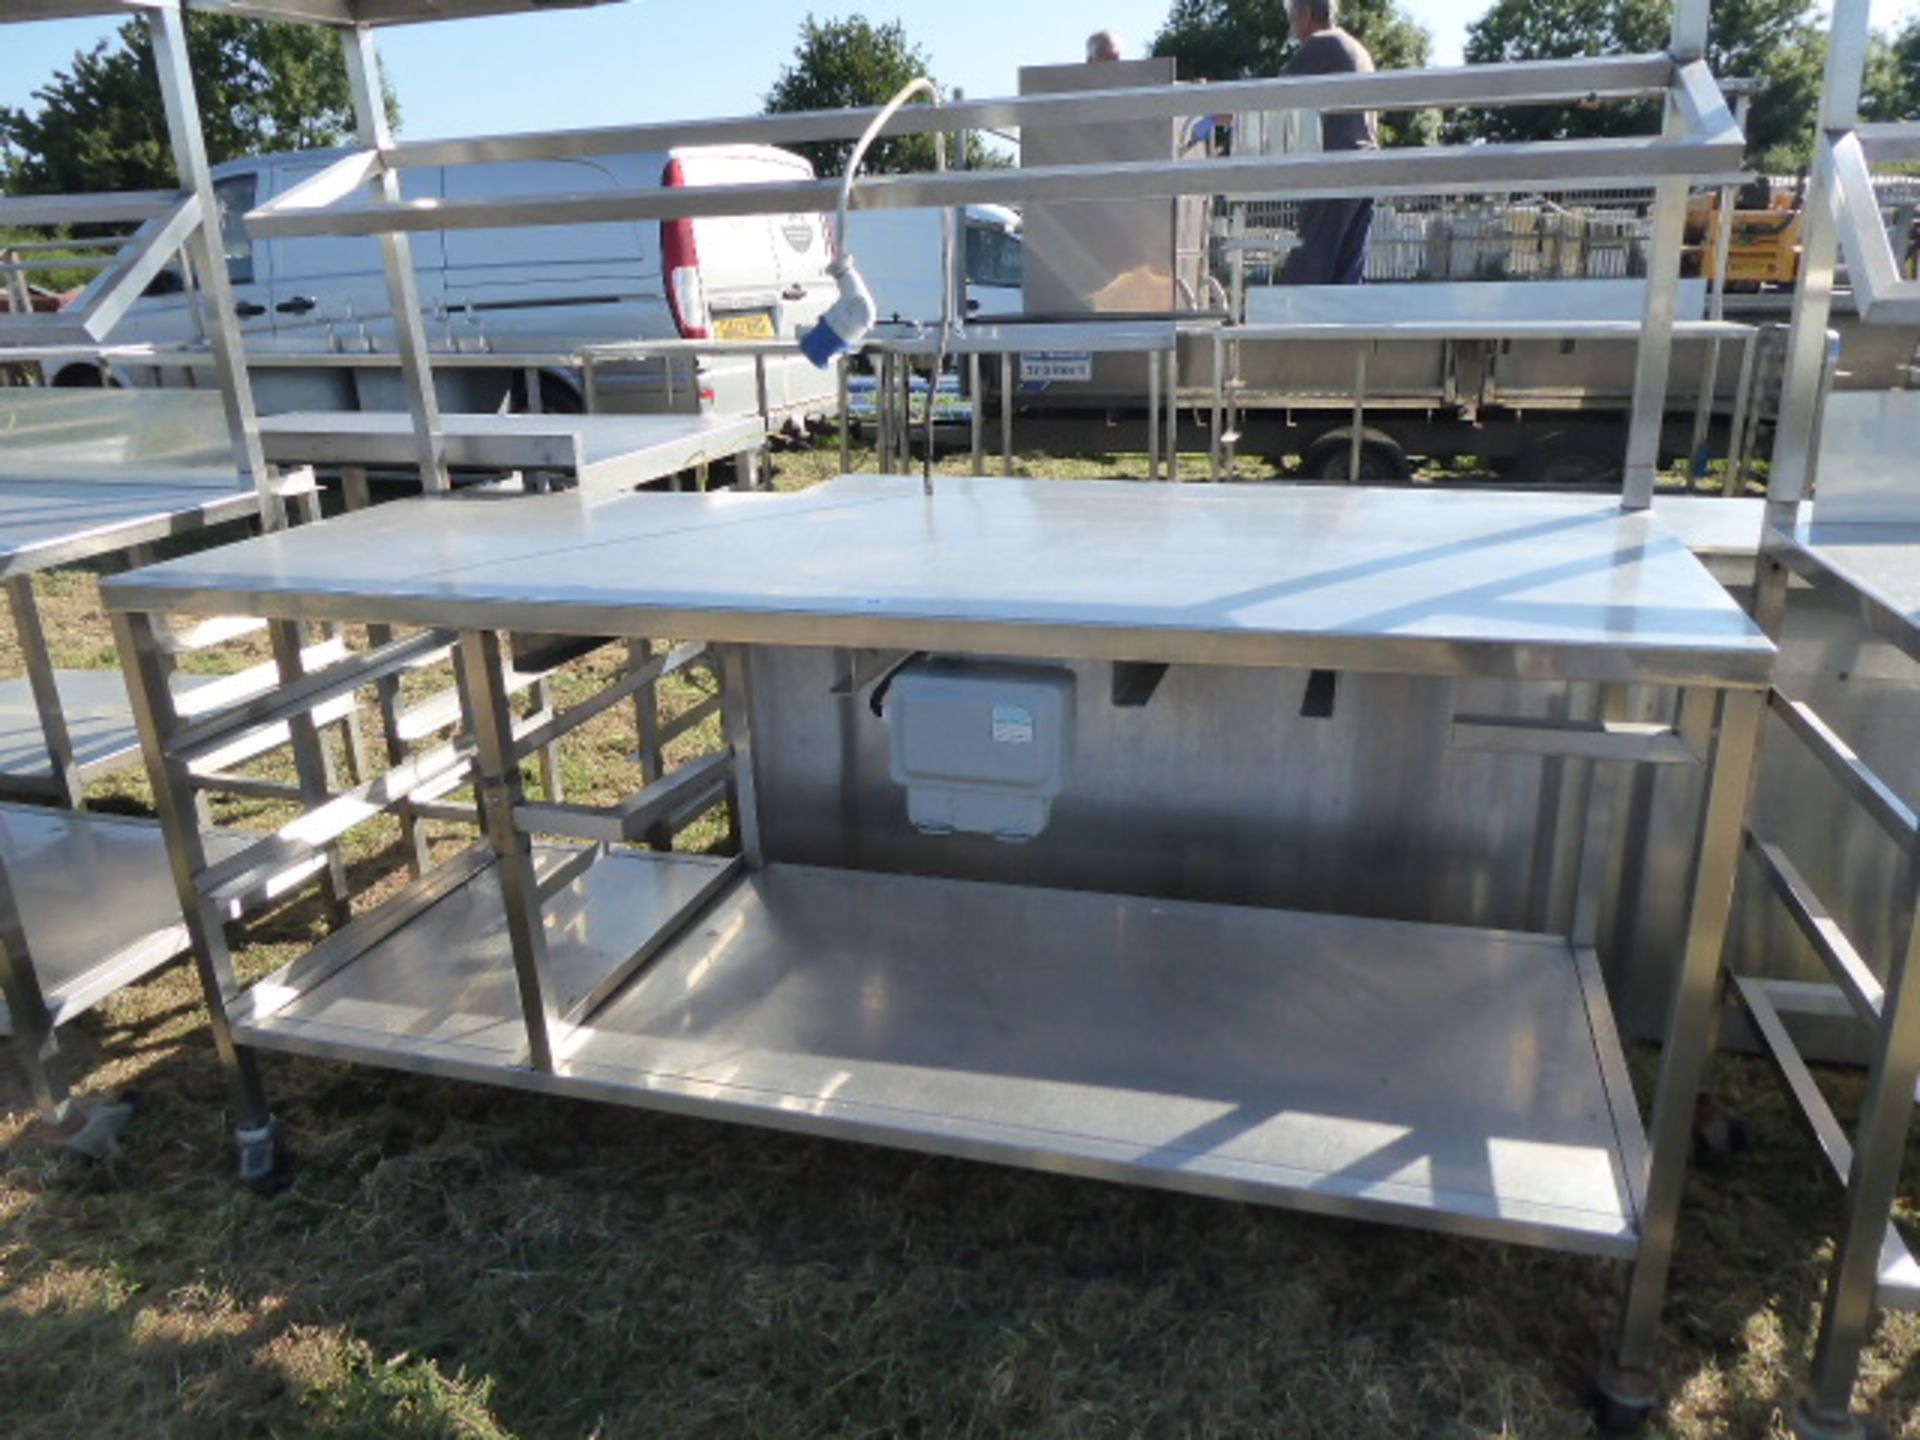 Stainless steel mobile food preparation station with 1 shelf over, shelf under space for trays and a - Image 2 of 2